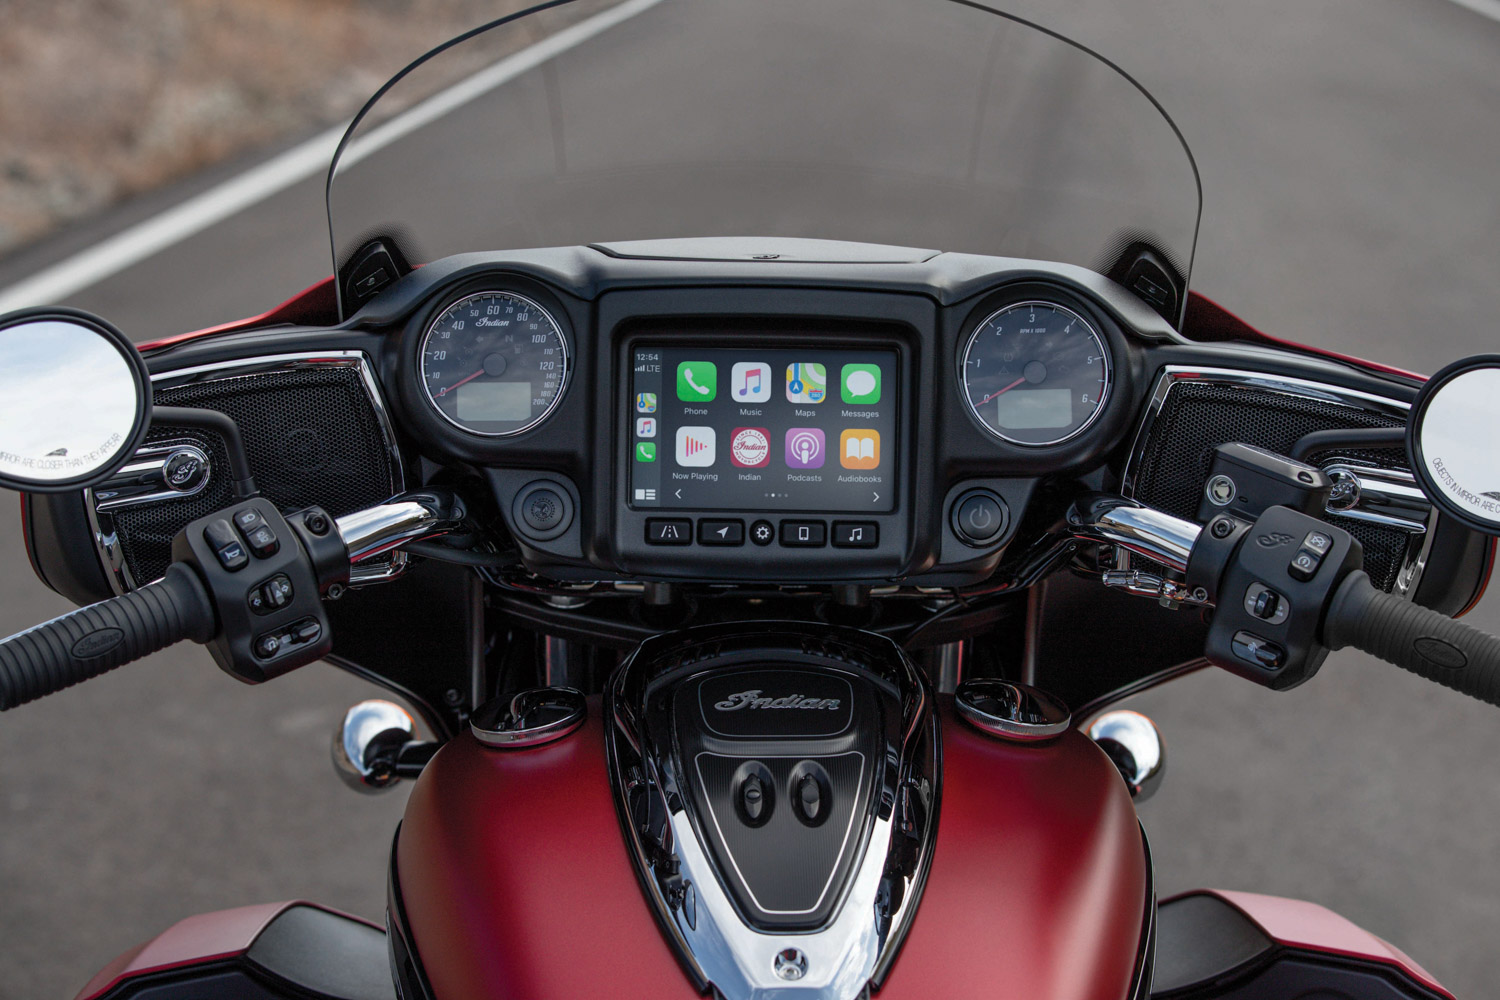 https://www.customtour.ca/wp-content/uploads/2020/08/Indian-Motorcycle-Int%C3%A9gration-d%E2%80%99Apple-CarPlay-11-of-17.jpg